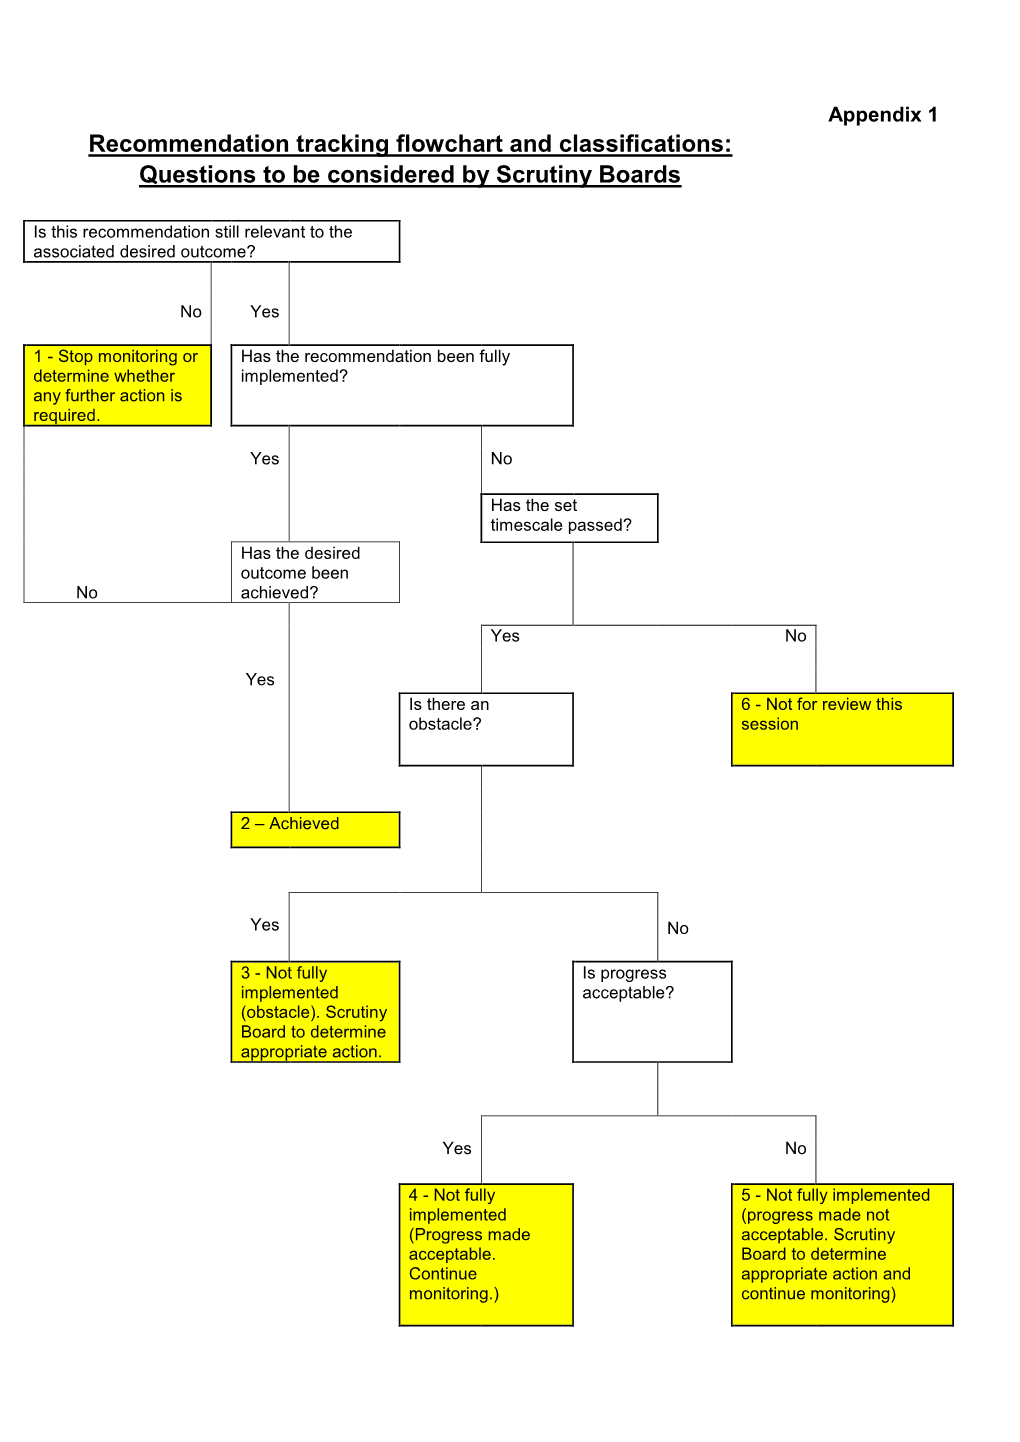 Recommendation Tracking Flowchart and Classifications: Questions to Be Considered by Scrutiny Boards